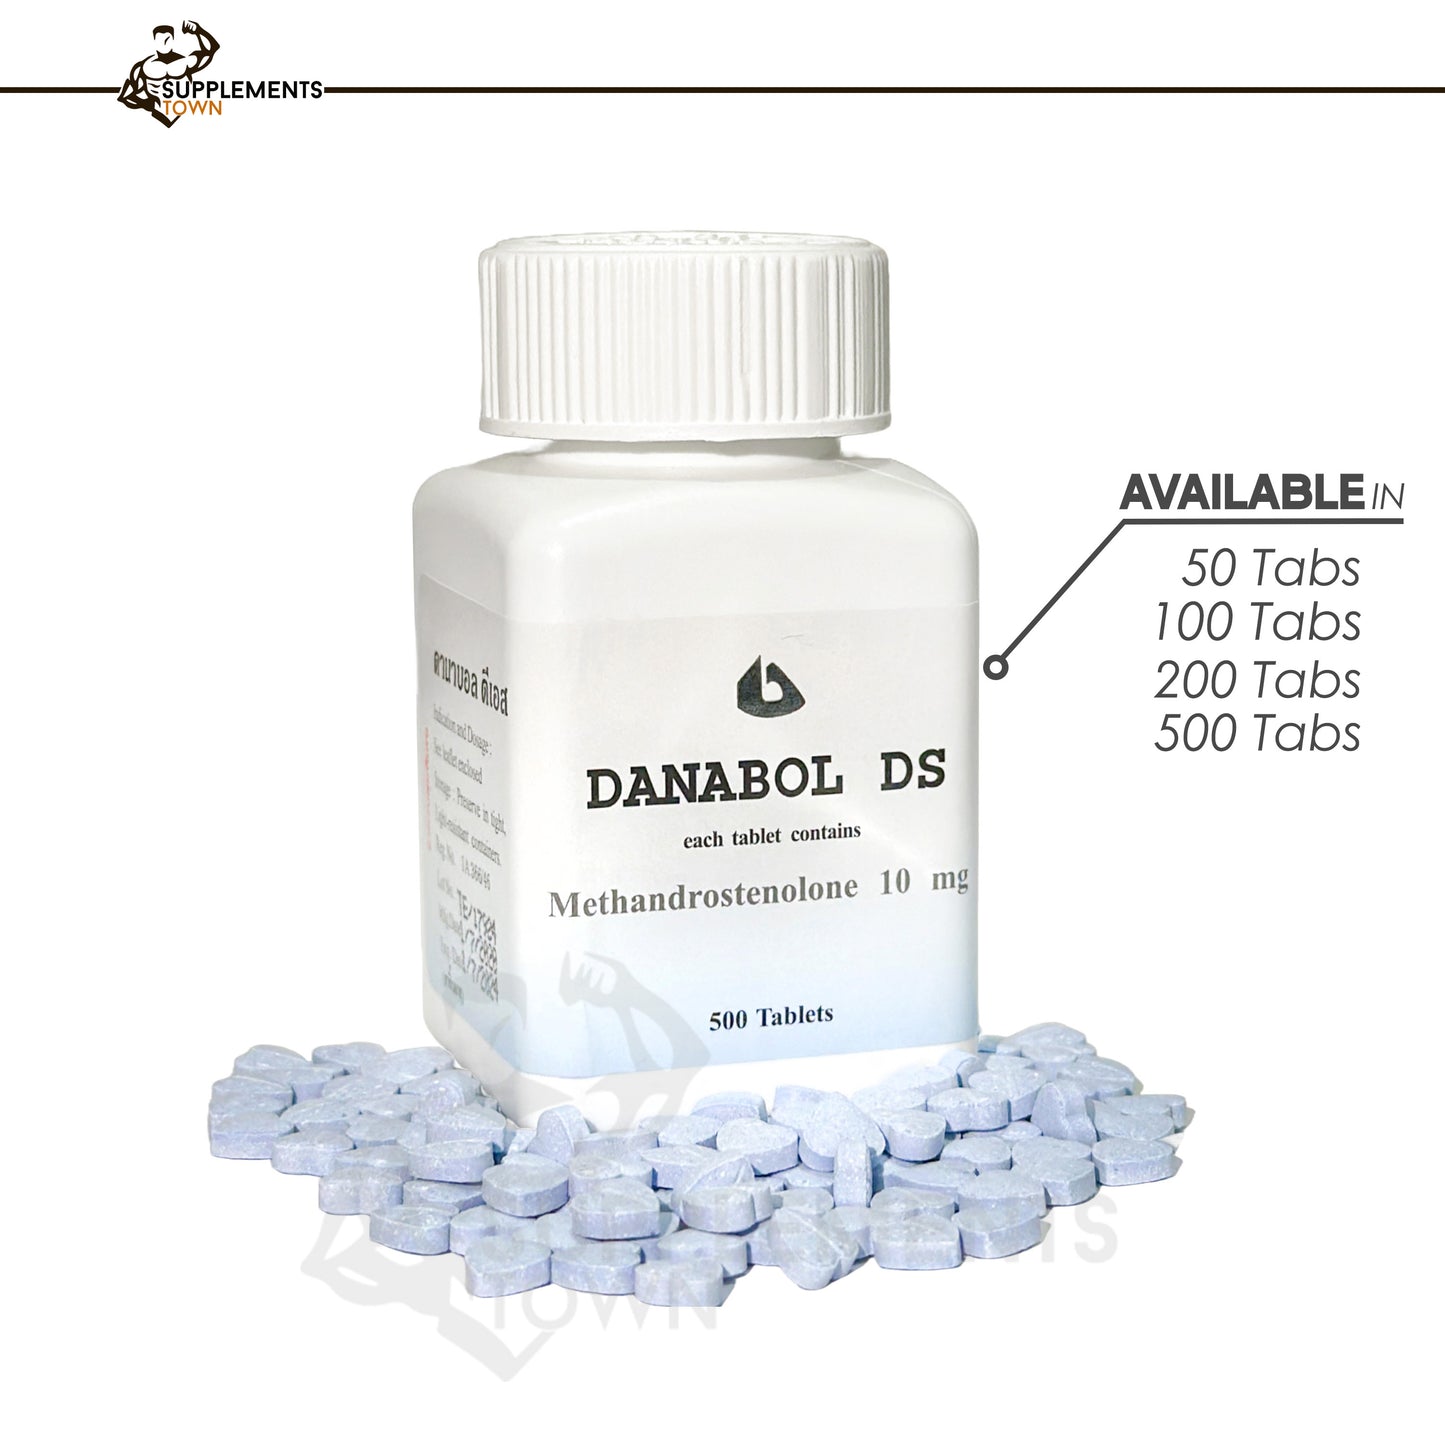 DANABOL DS / DIANABOL / METHANDROSTENOLONE 10MG - 100 TABLETS - EXP. DATE 1/7/2027